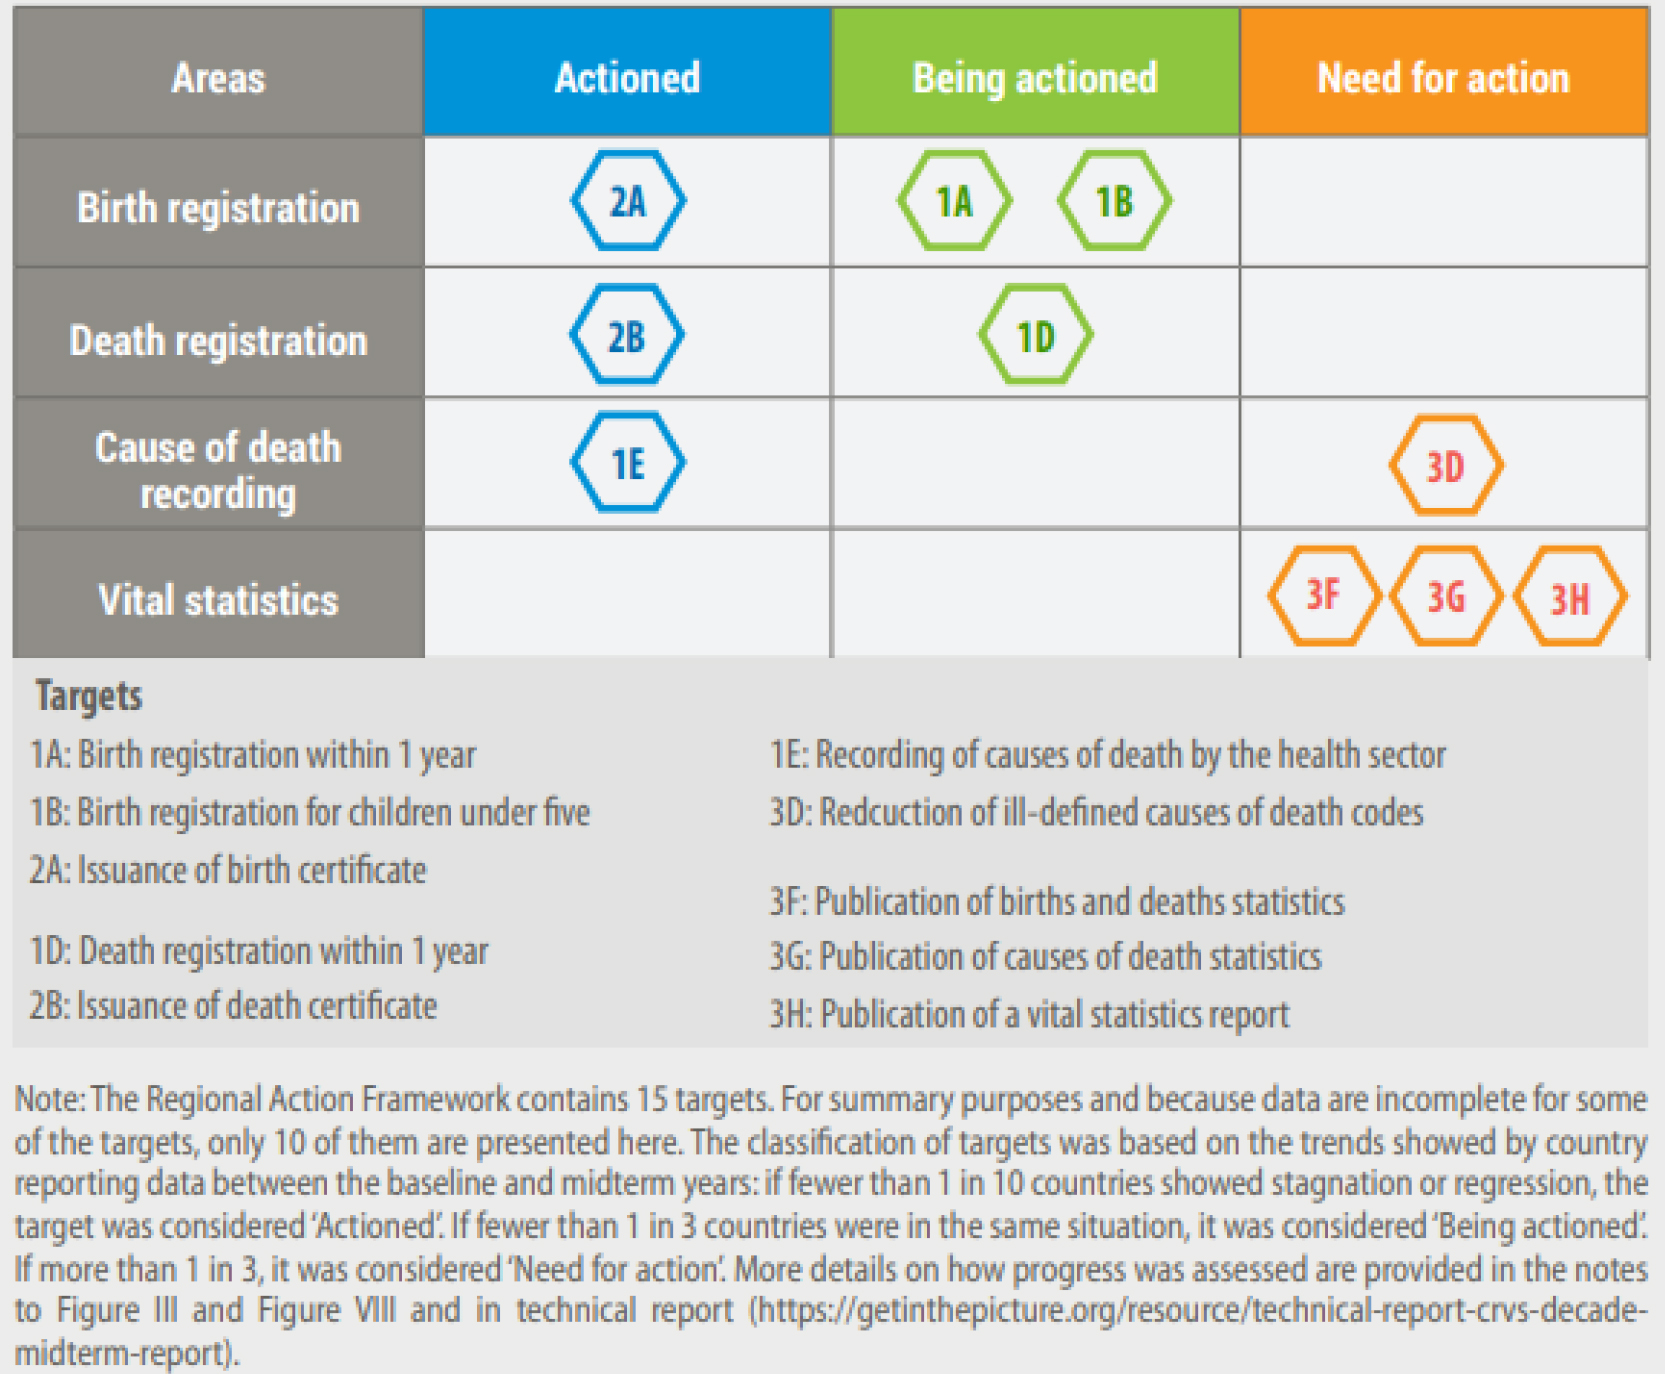 Status of action for key targets of the Regional Action Framework at the midterm of the Civil Registration and Vital Statistics Decade. Source: “A snapshot of progress midway through the Asian and Pacific Civil Registration and Vital Statistics Decade”, UNESCAP, 2021.